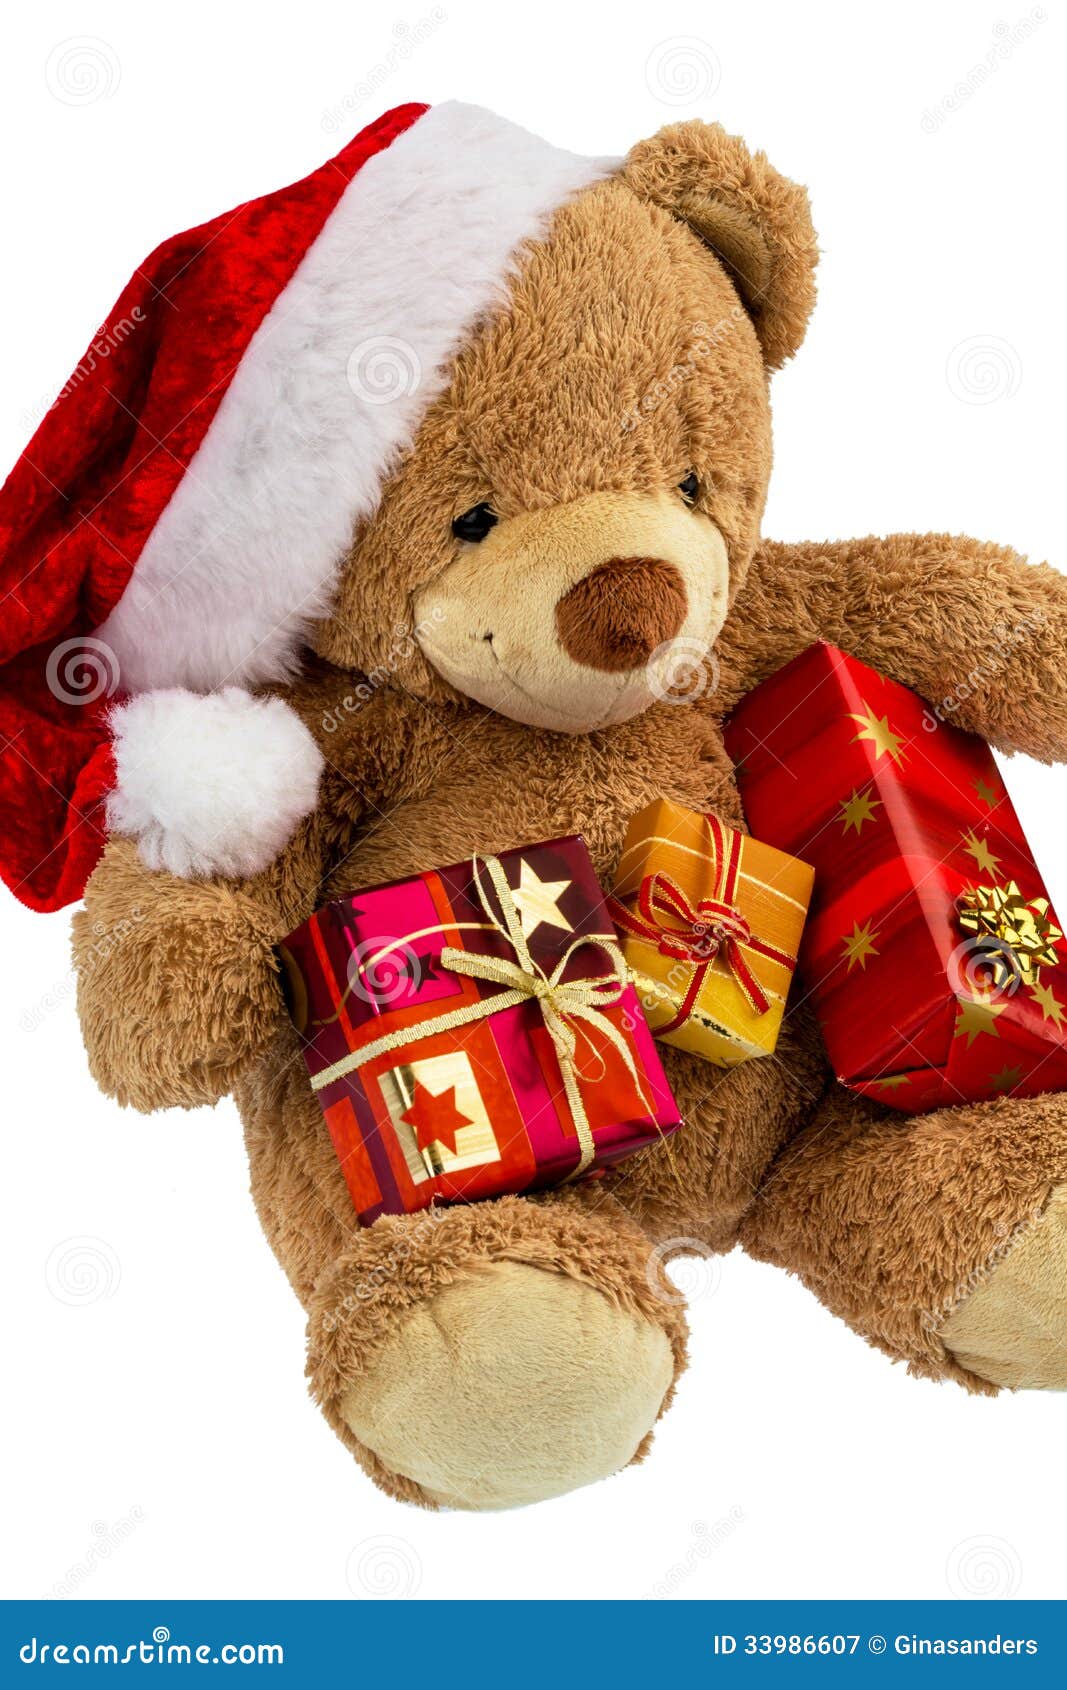 Teddy Bear With Christmas Gifts Stock Image Image of